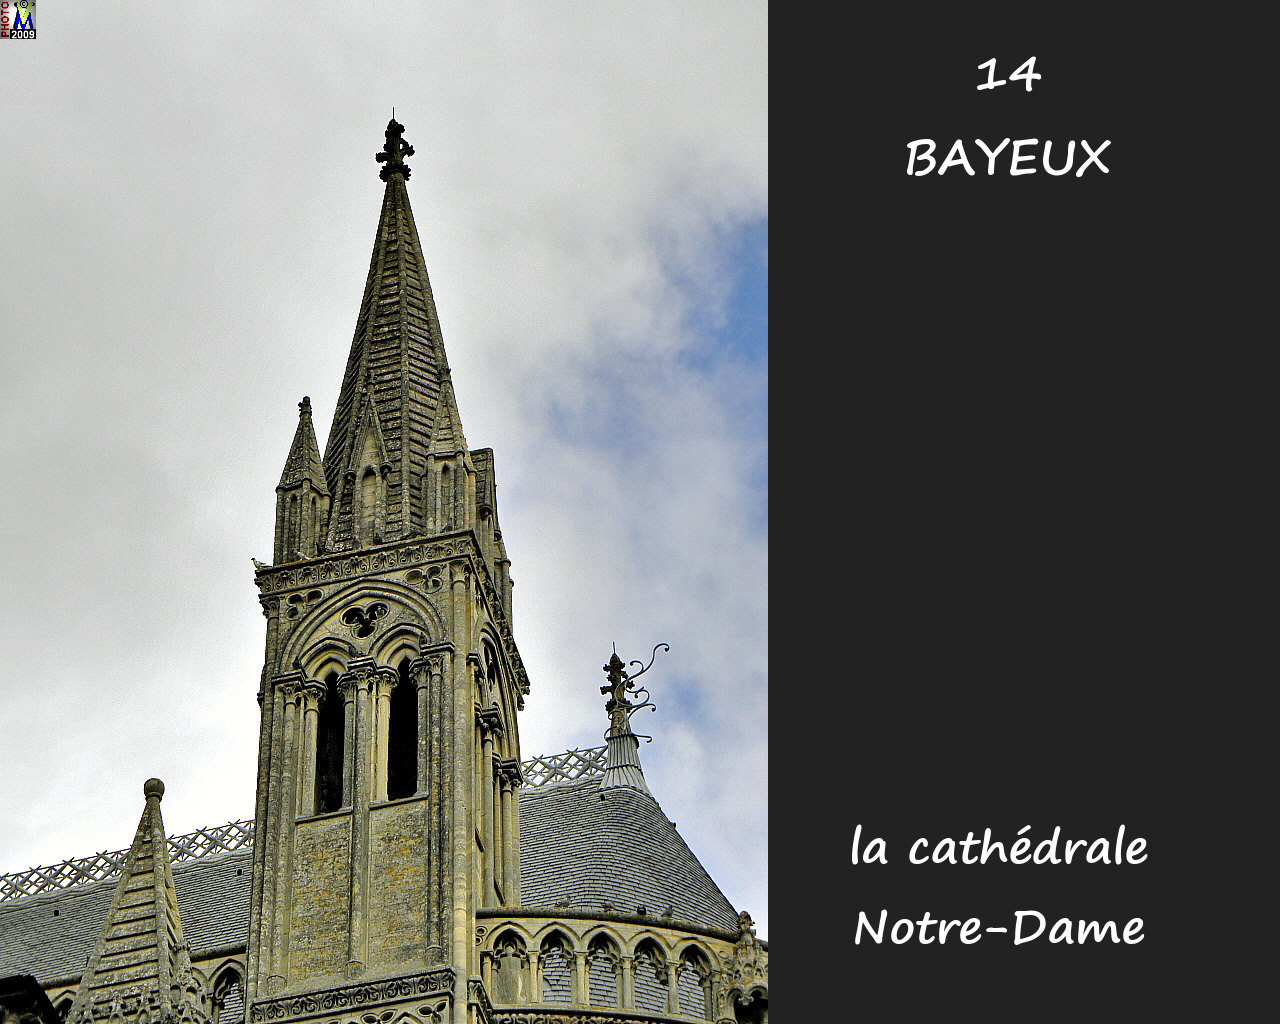 14BAYEUX_cathedrale_114.jpg